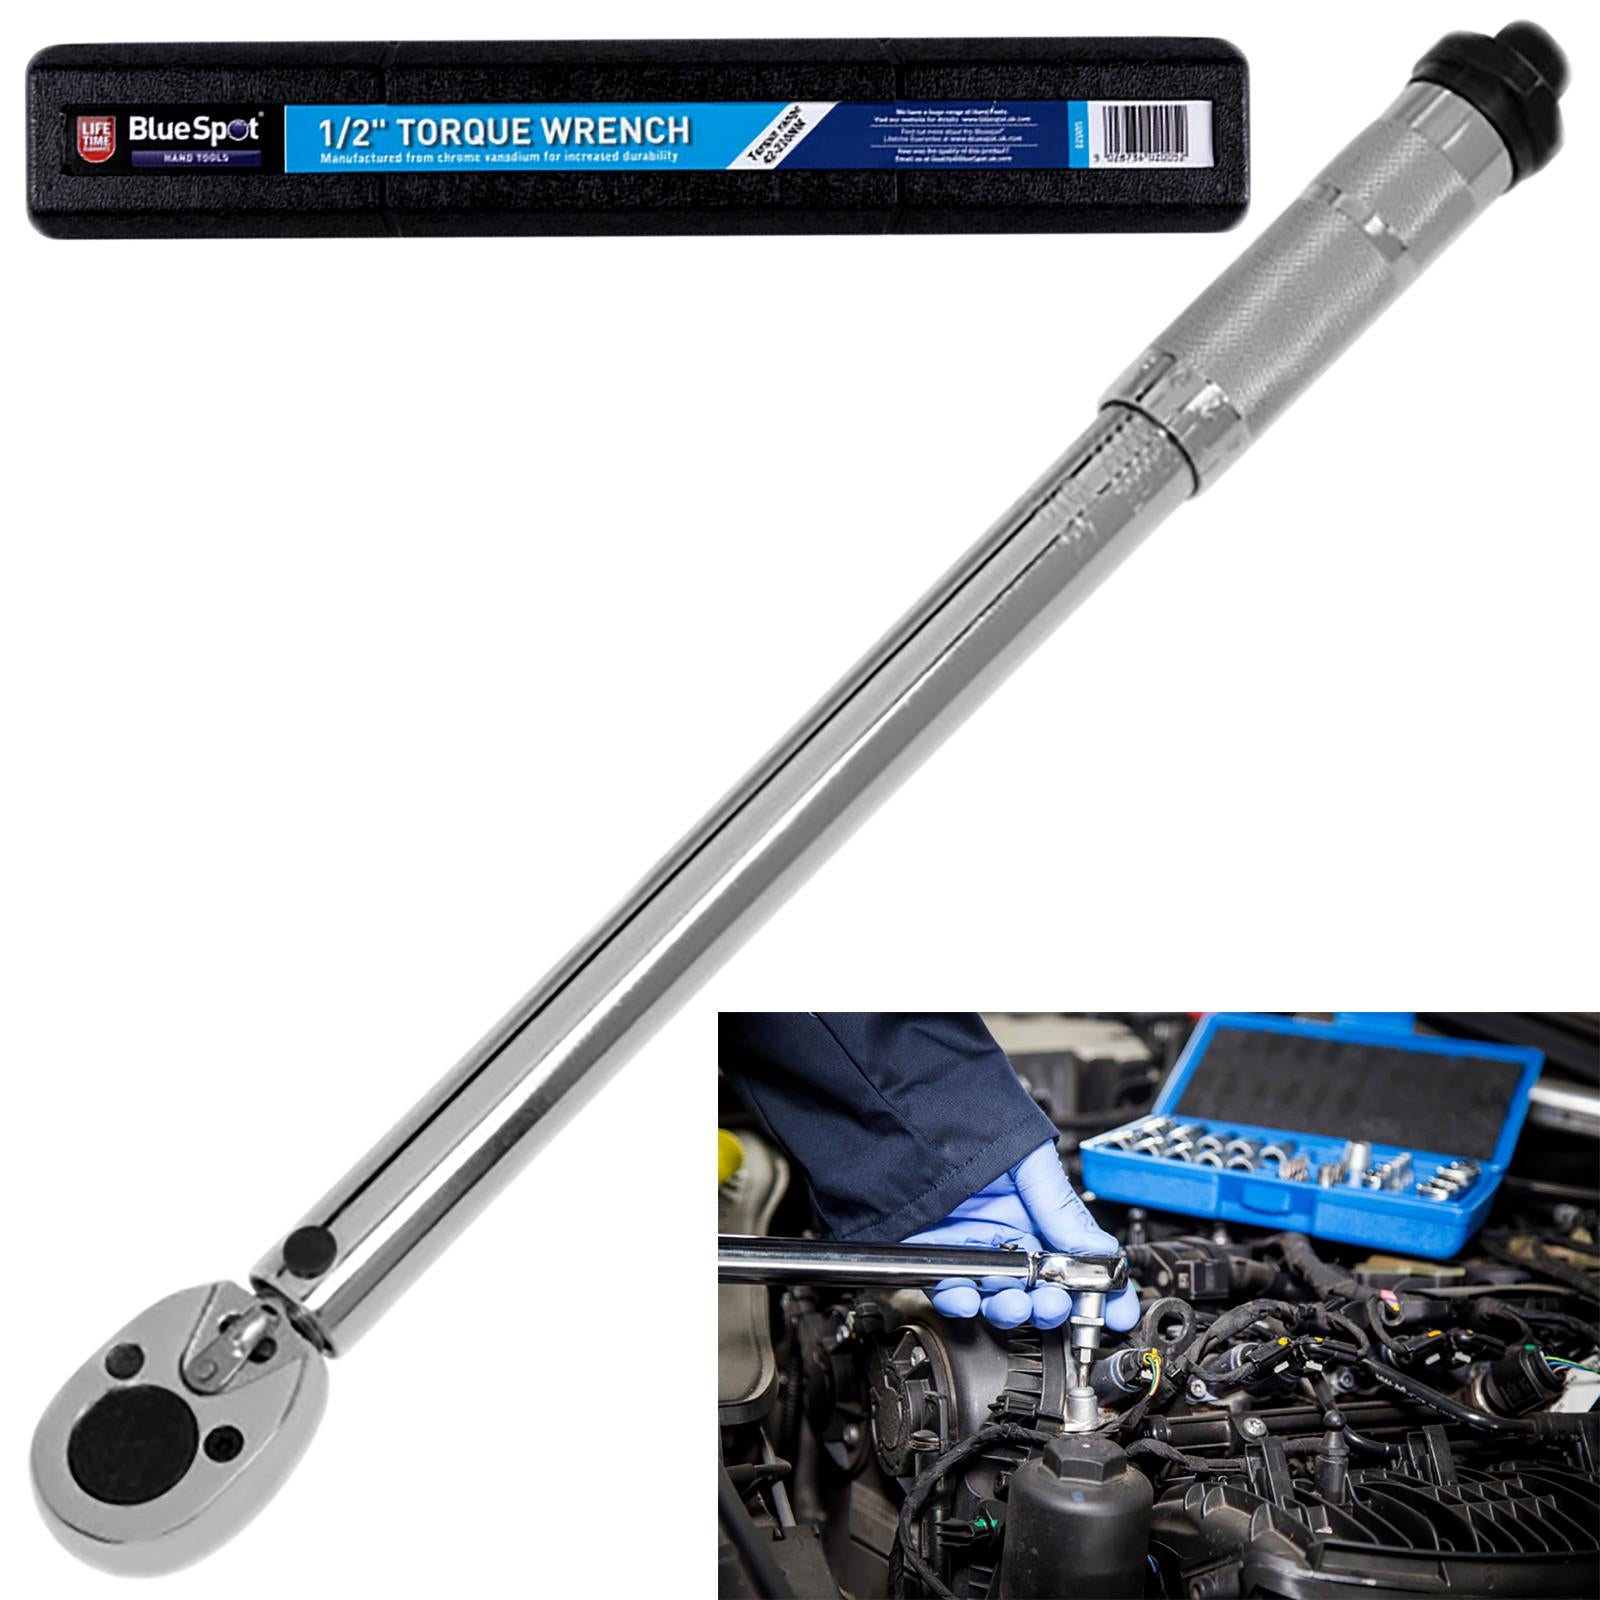 BlueSpot Calibrated Torque Wrench 1/2" Drive 42-210Nm